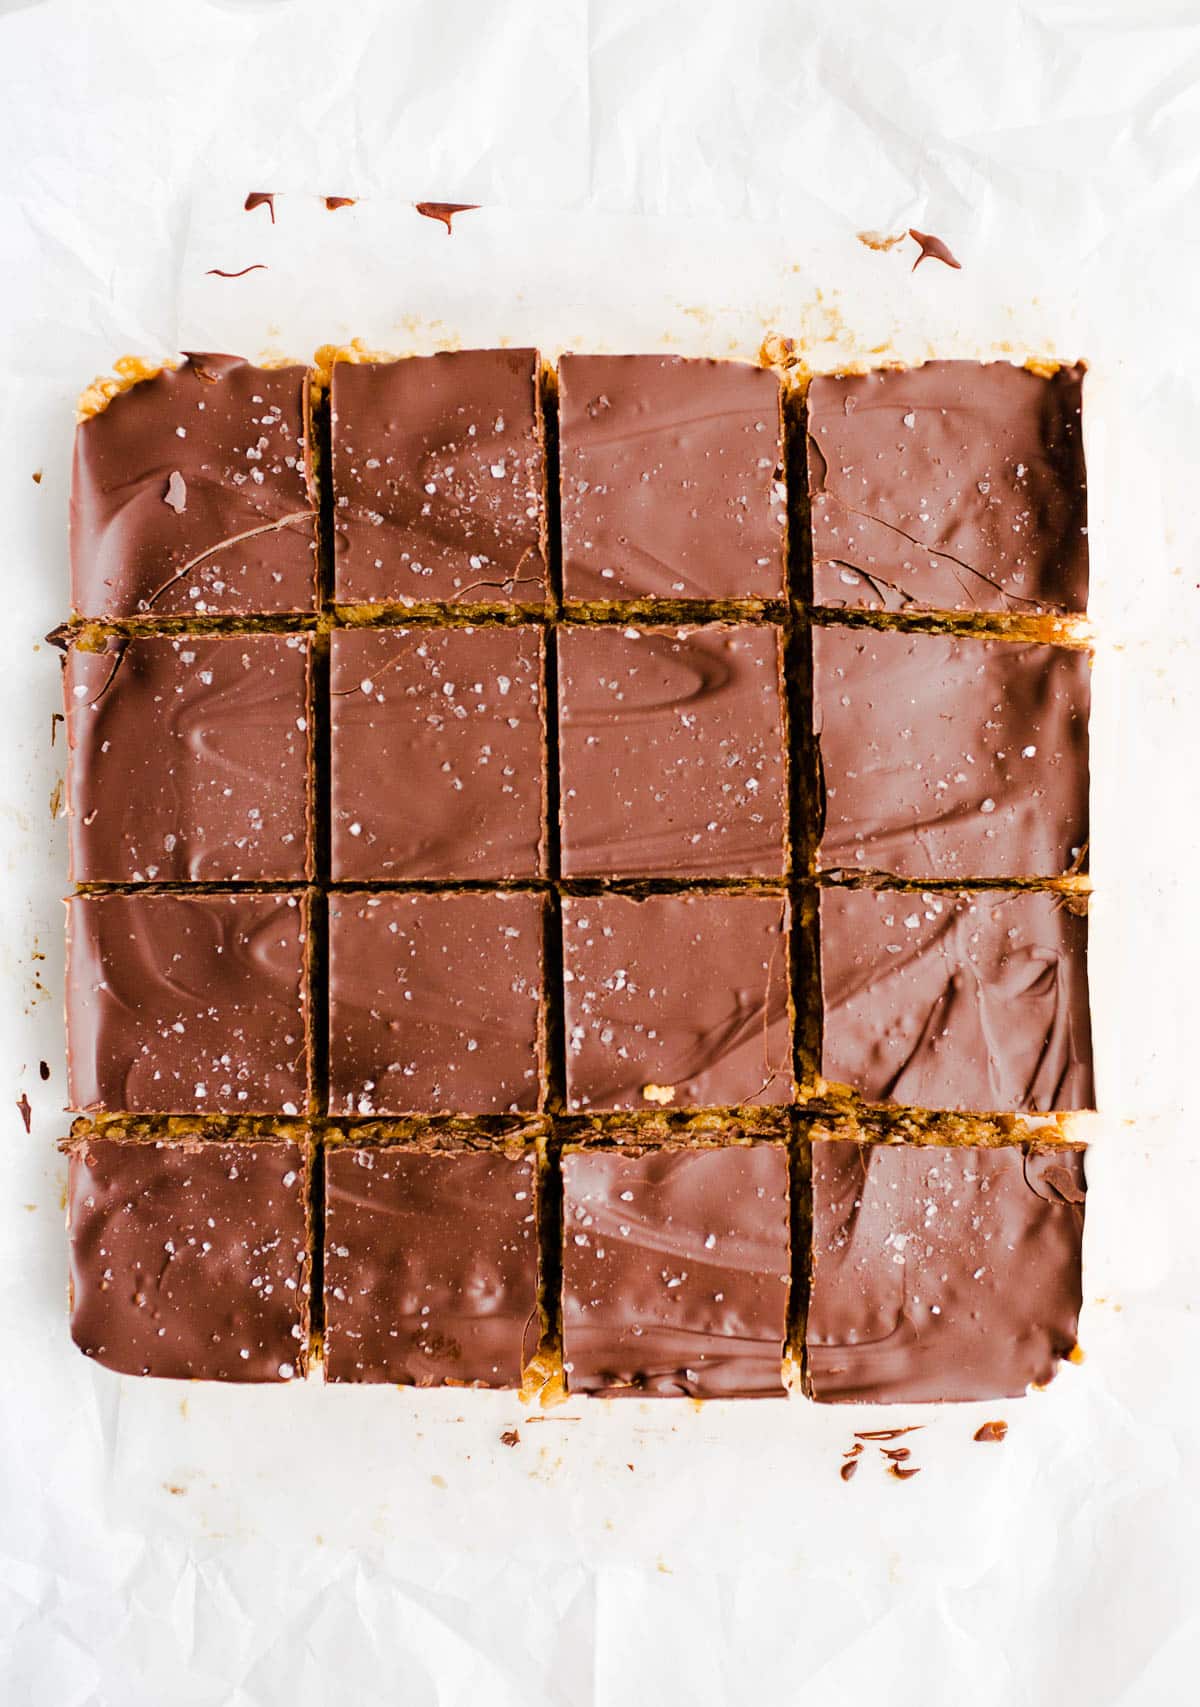 Chocolate covered peanut butter cereal bars freshly sliced on top of white parchment paper.